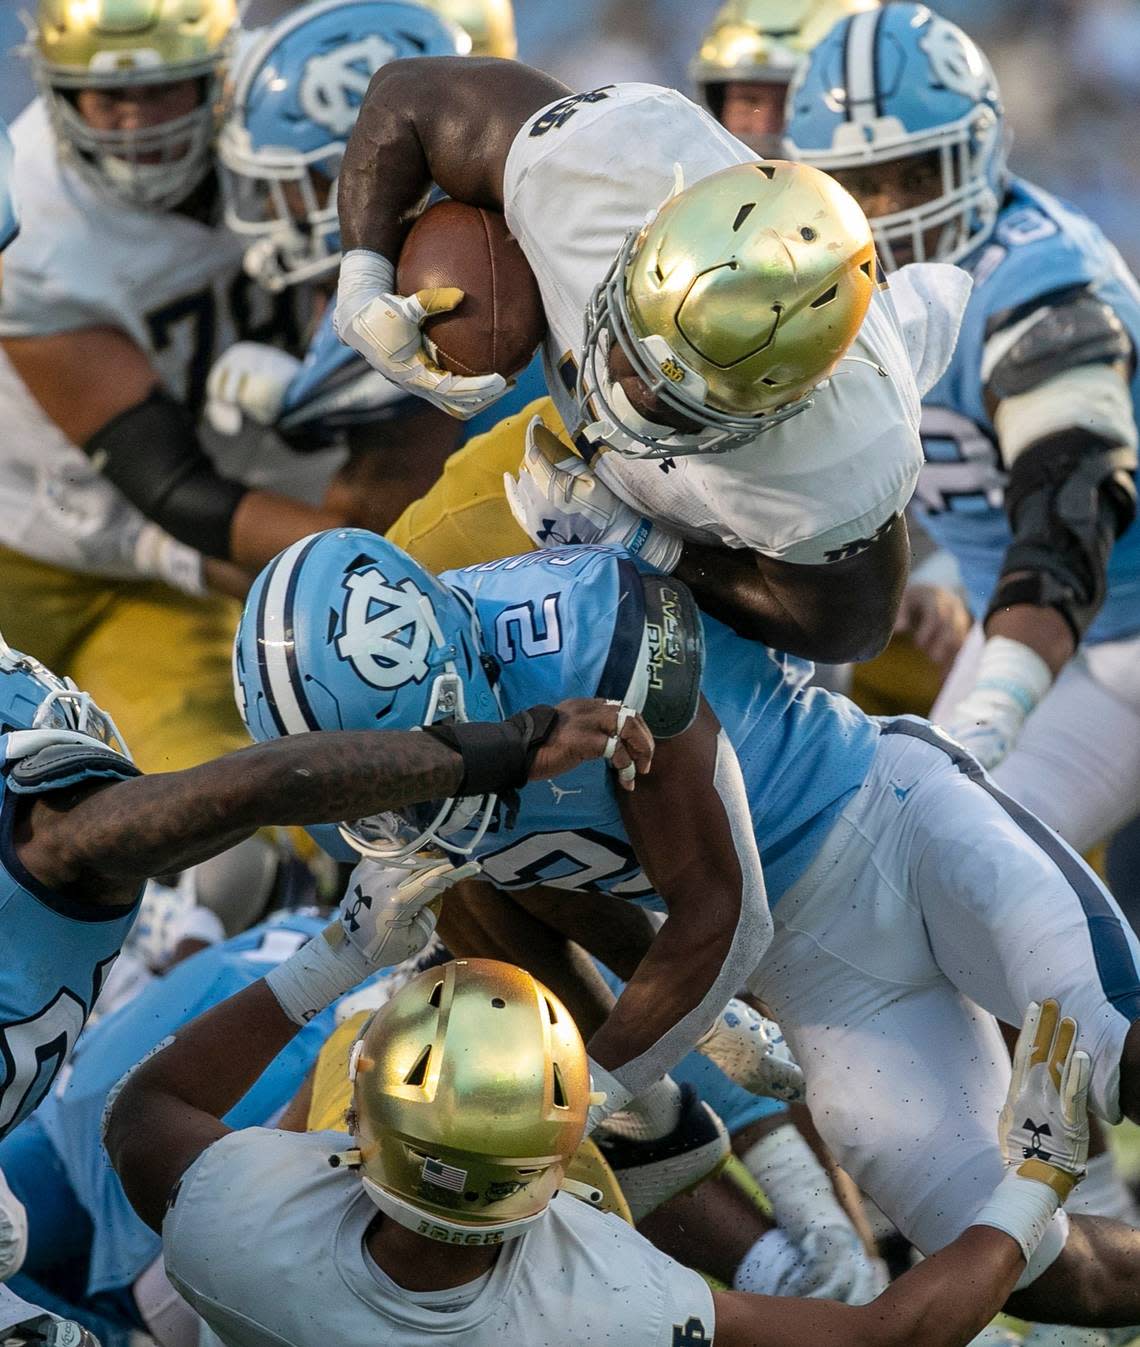 Notre Dame’s Audric Estime (7) tries to score on a seven-yard carry before fumbling on the goal line, turning the ball over to North Carolina late in the fourth quarter on Saturday, September 24, 2022 at Kenan Stadium in Chapel Hill, N.